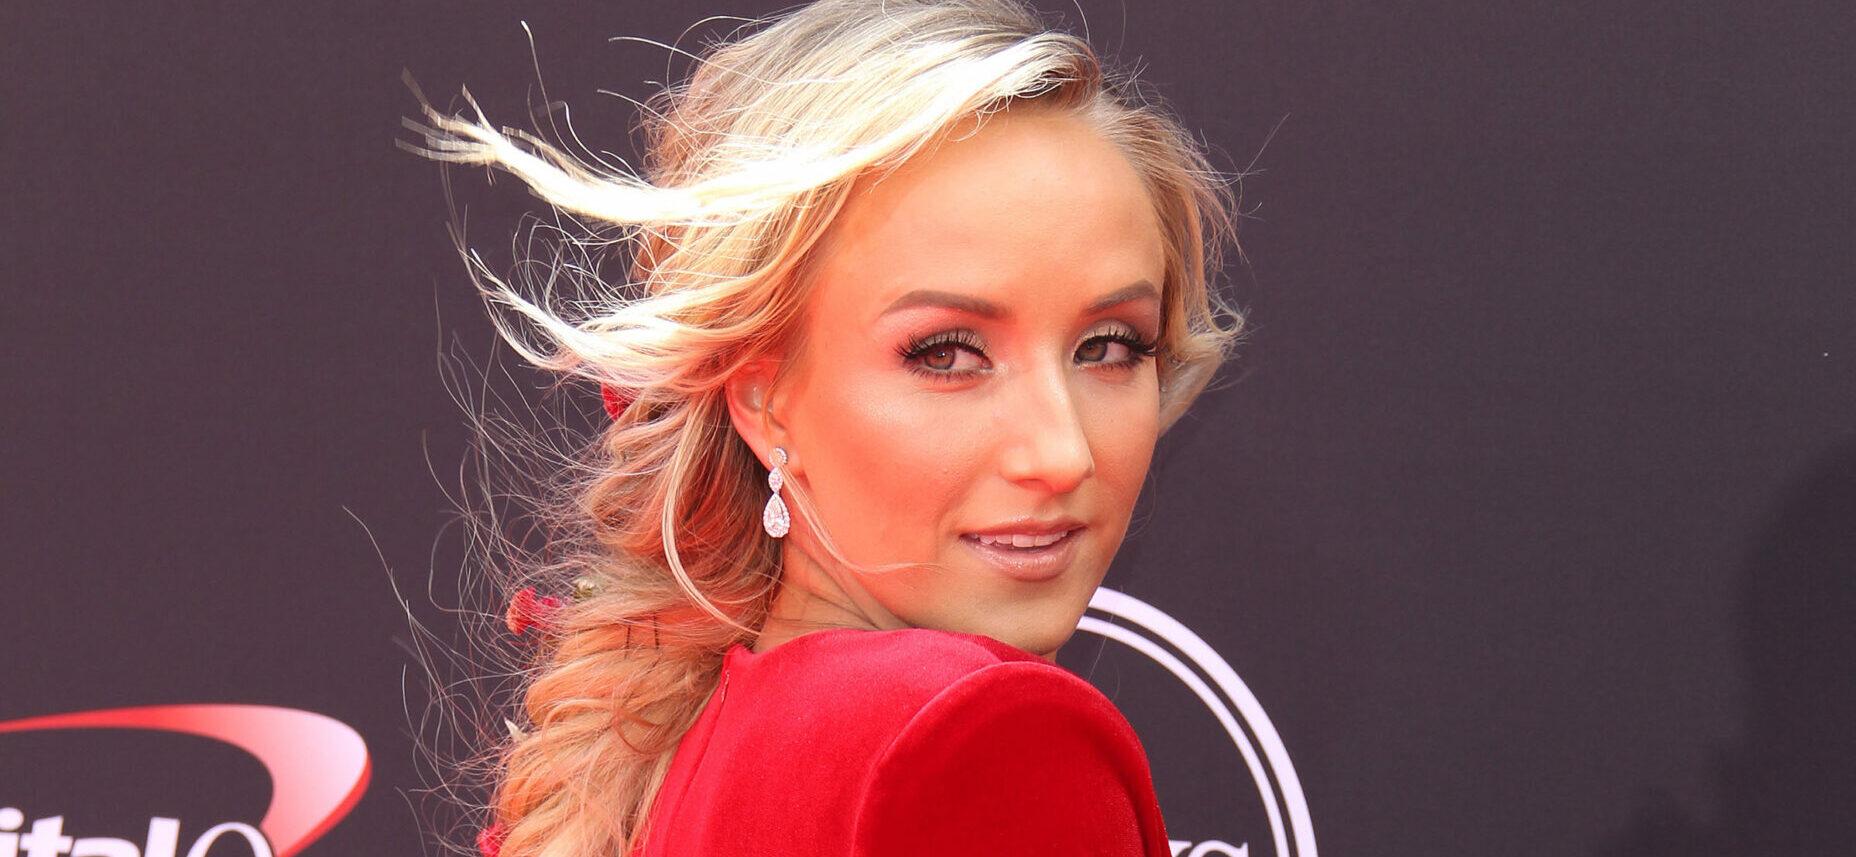 Gymnast Nastia Liukin Models Adventurous New Fit From Her Fall Collection